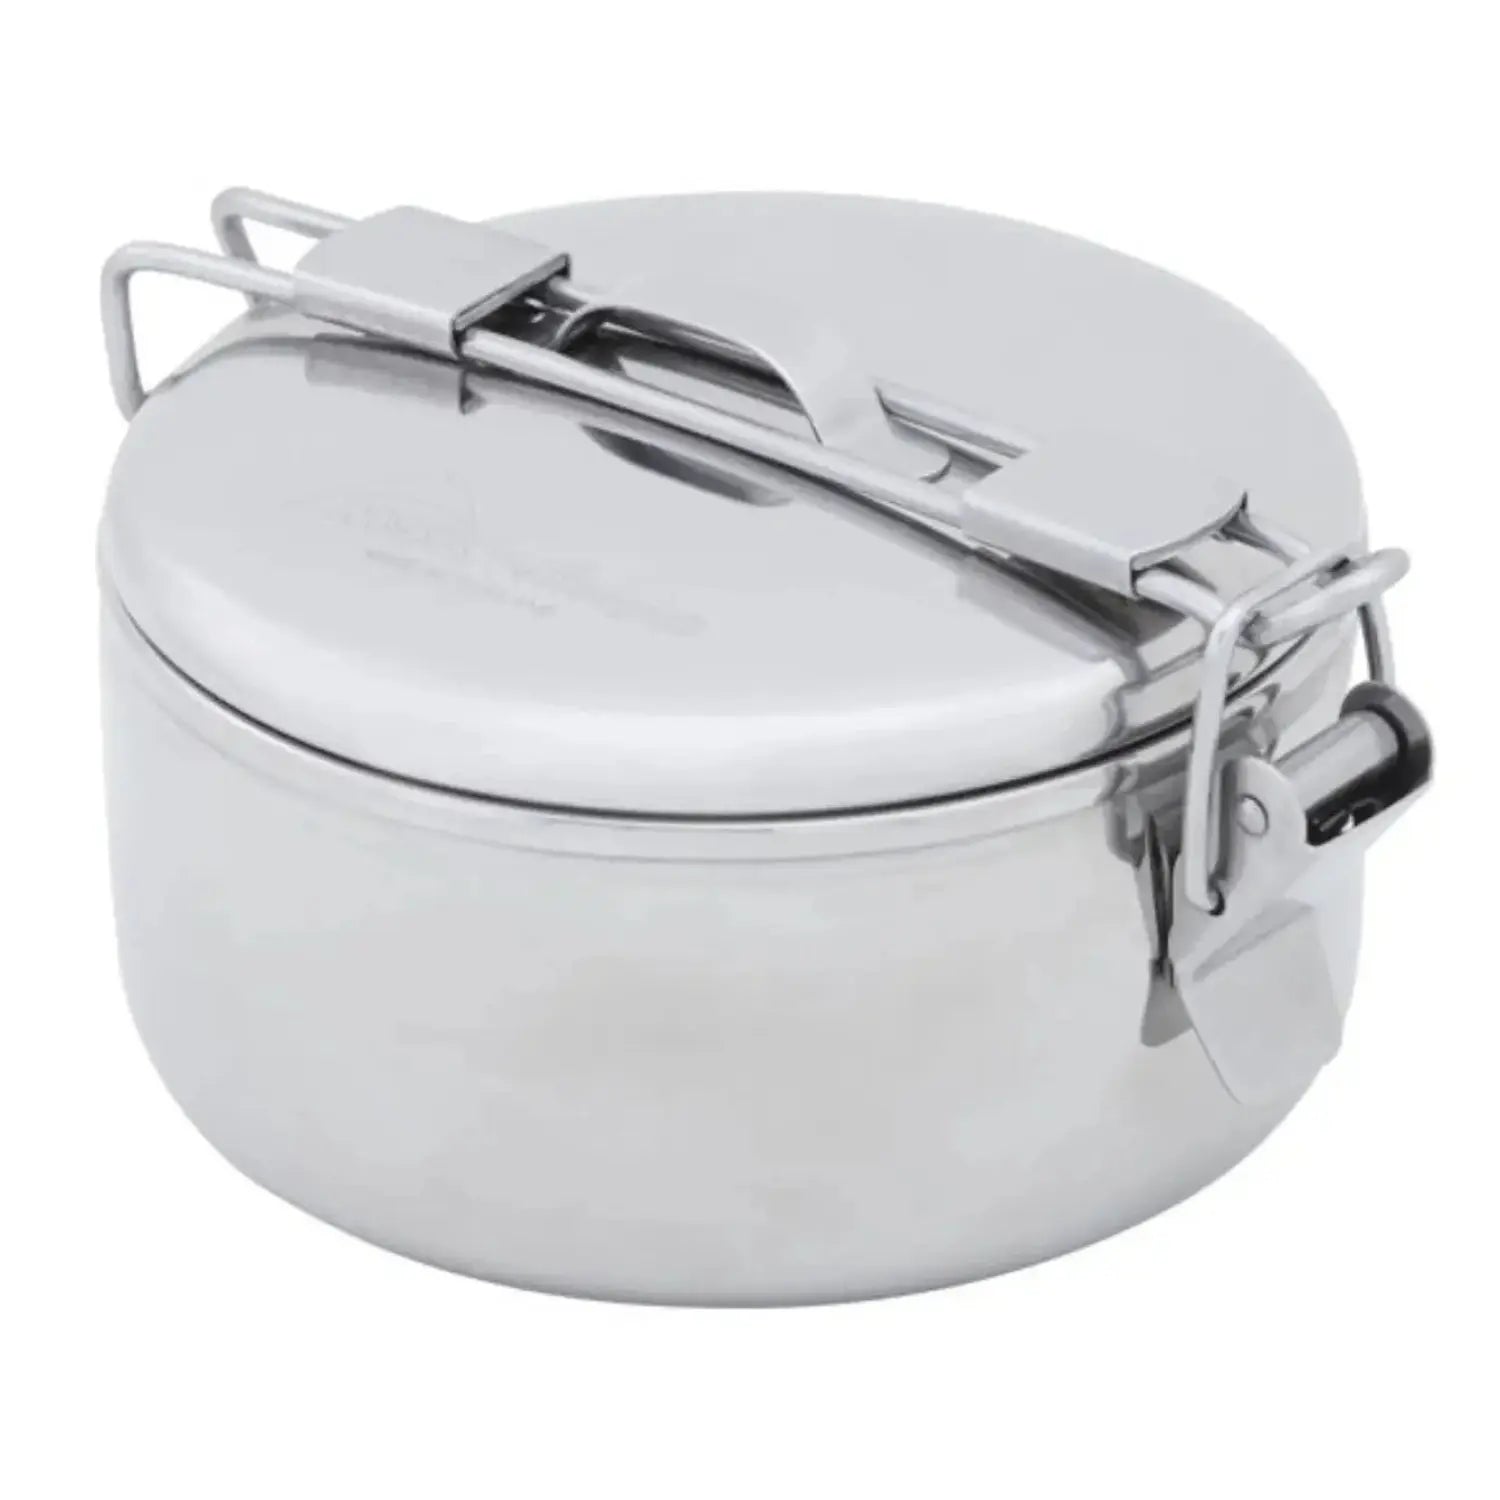 MSR's Stowaway Pot with the lid on and handle folded and secured.